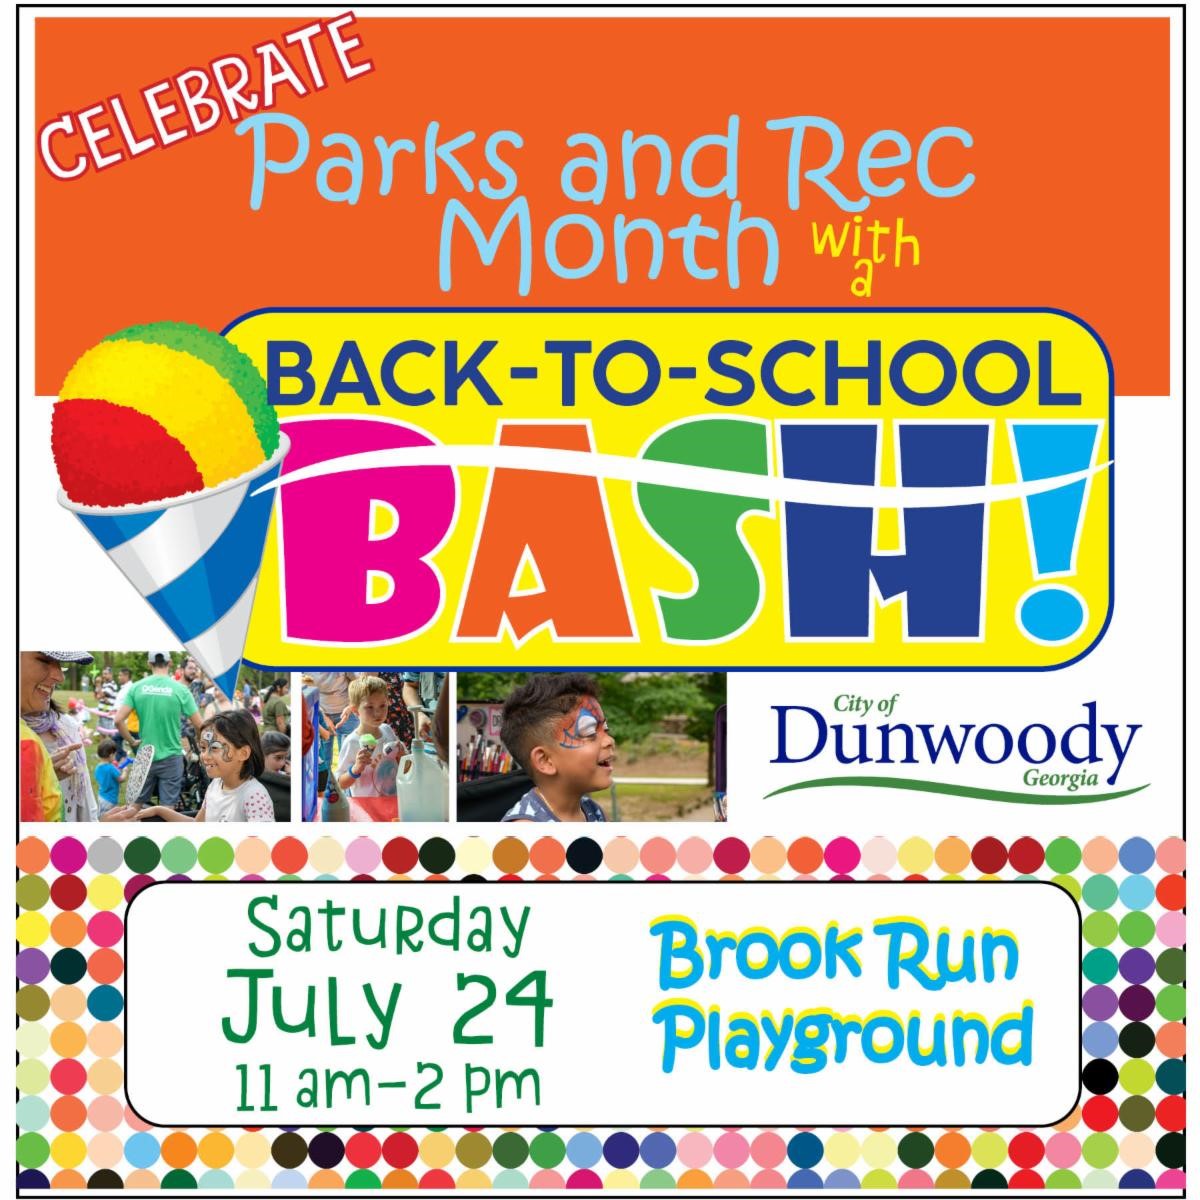 Back-to-School BASH to celebrate Parks & Rec Month